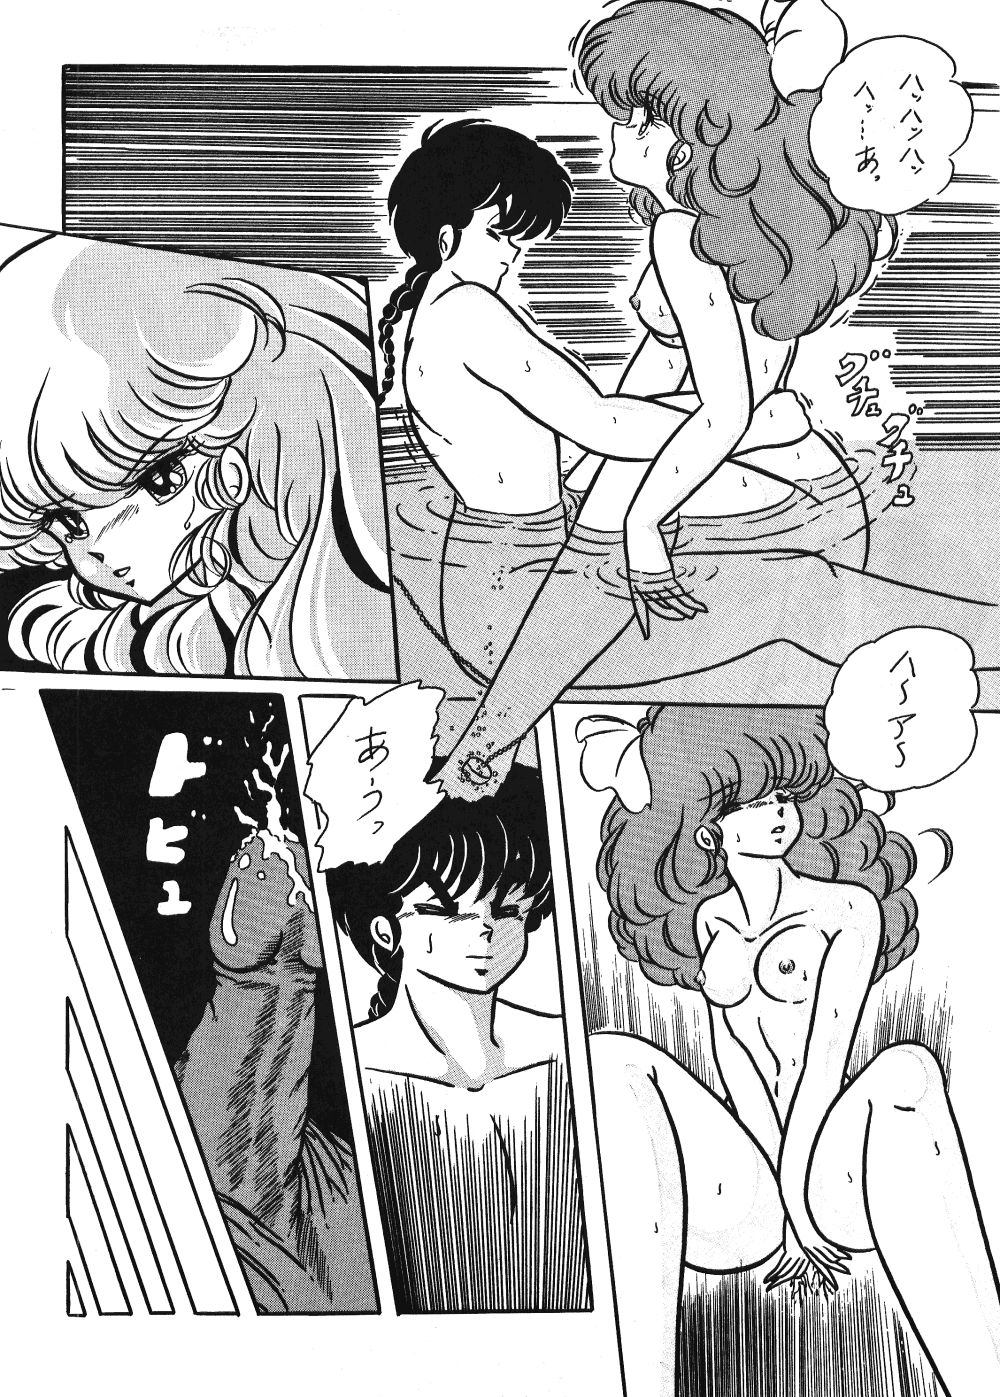 [C-COMPANY] C-COMPANY SPECIAL STAGE 2 (Ranma 1/2) page 21 full